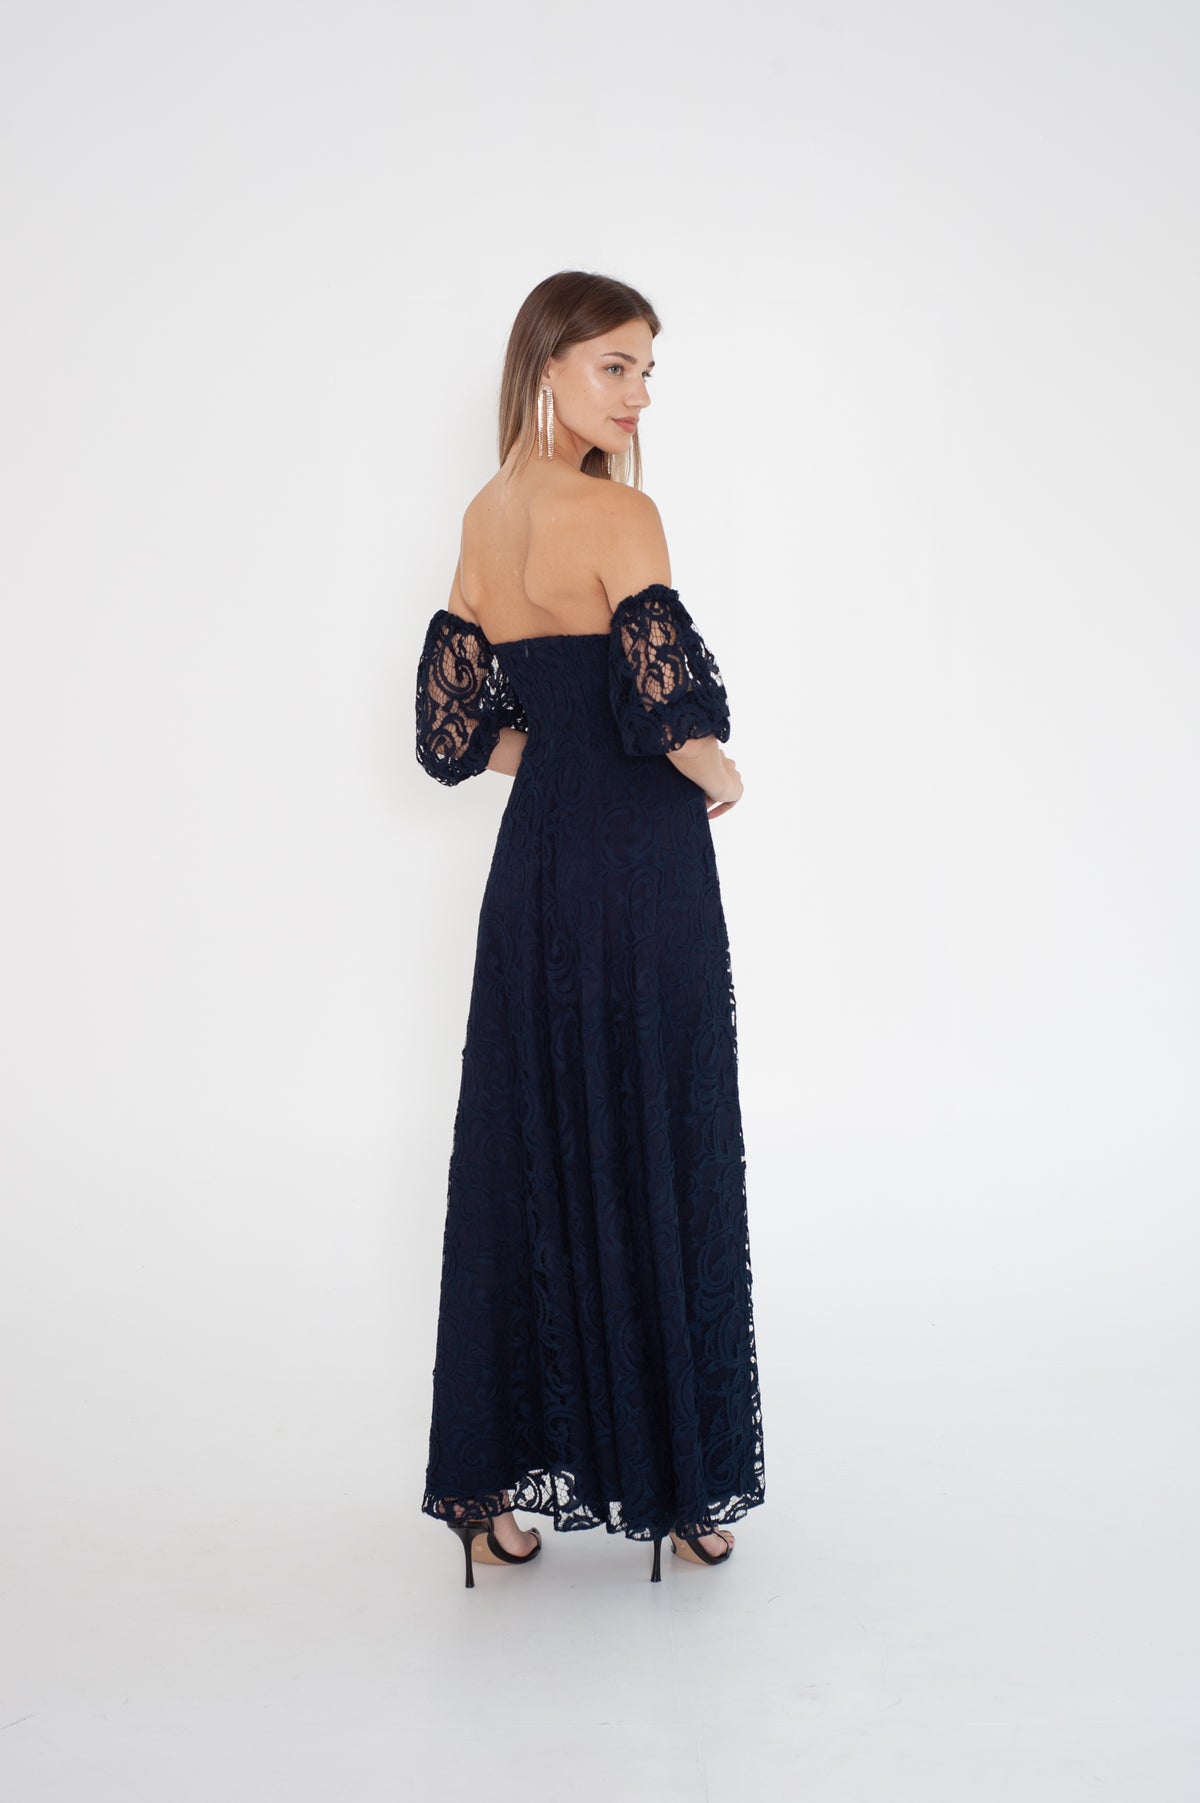 Dark blue lace dress with Off-the-shoulder sleeves